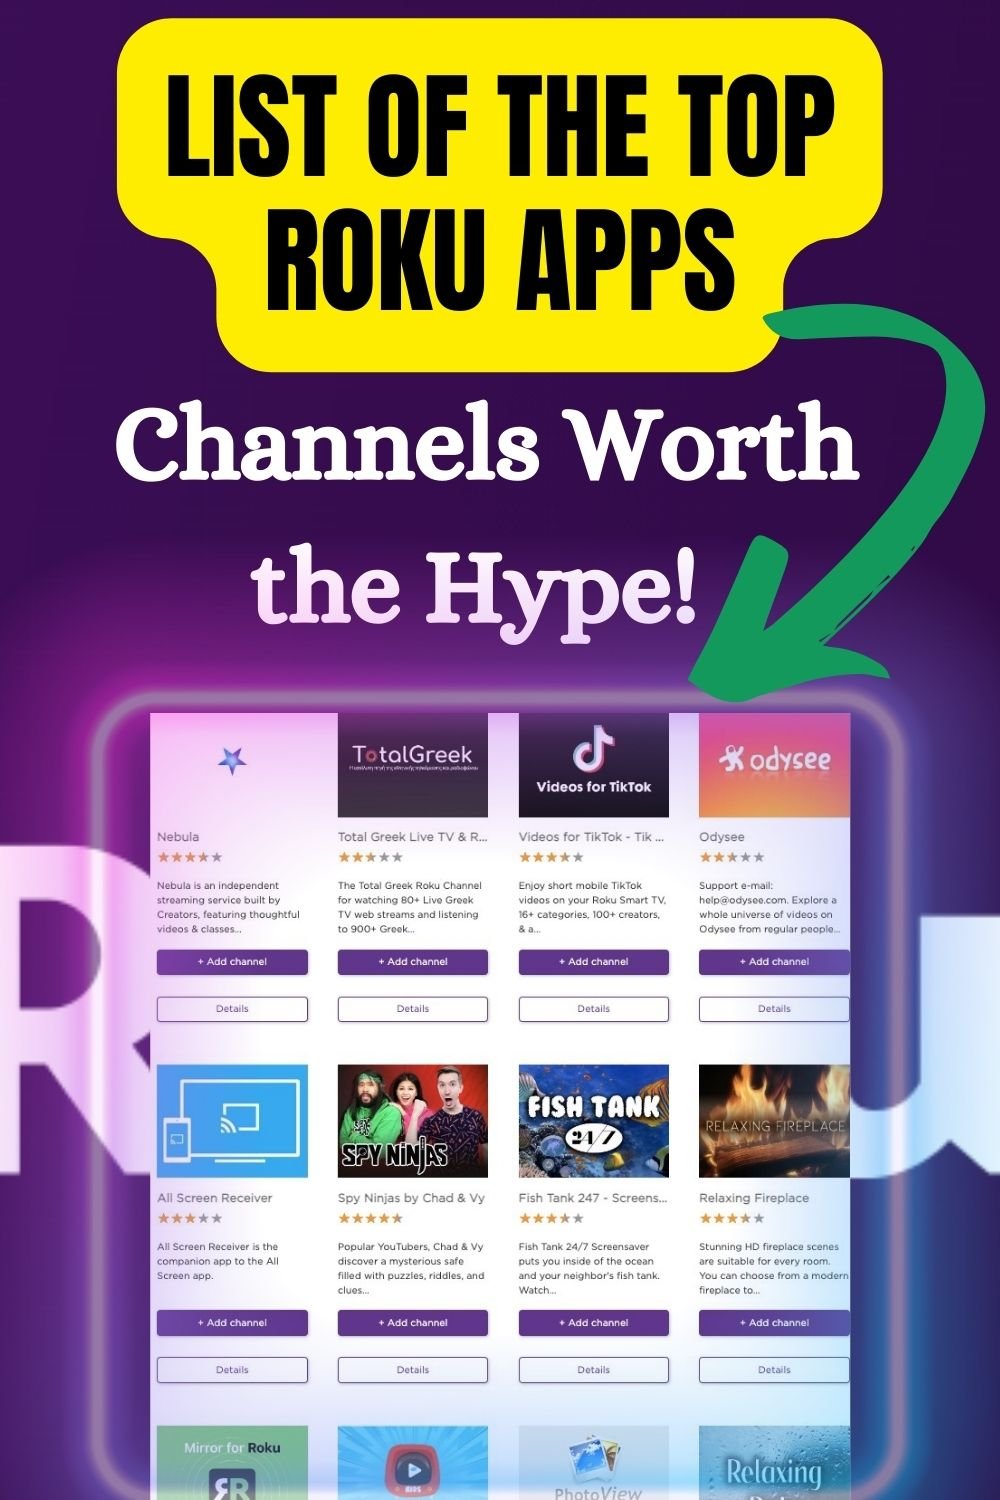 List of the Top roku apps